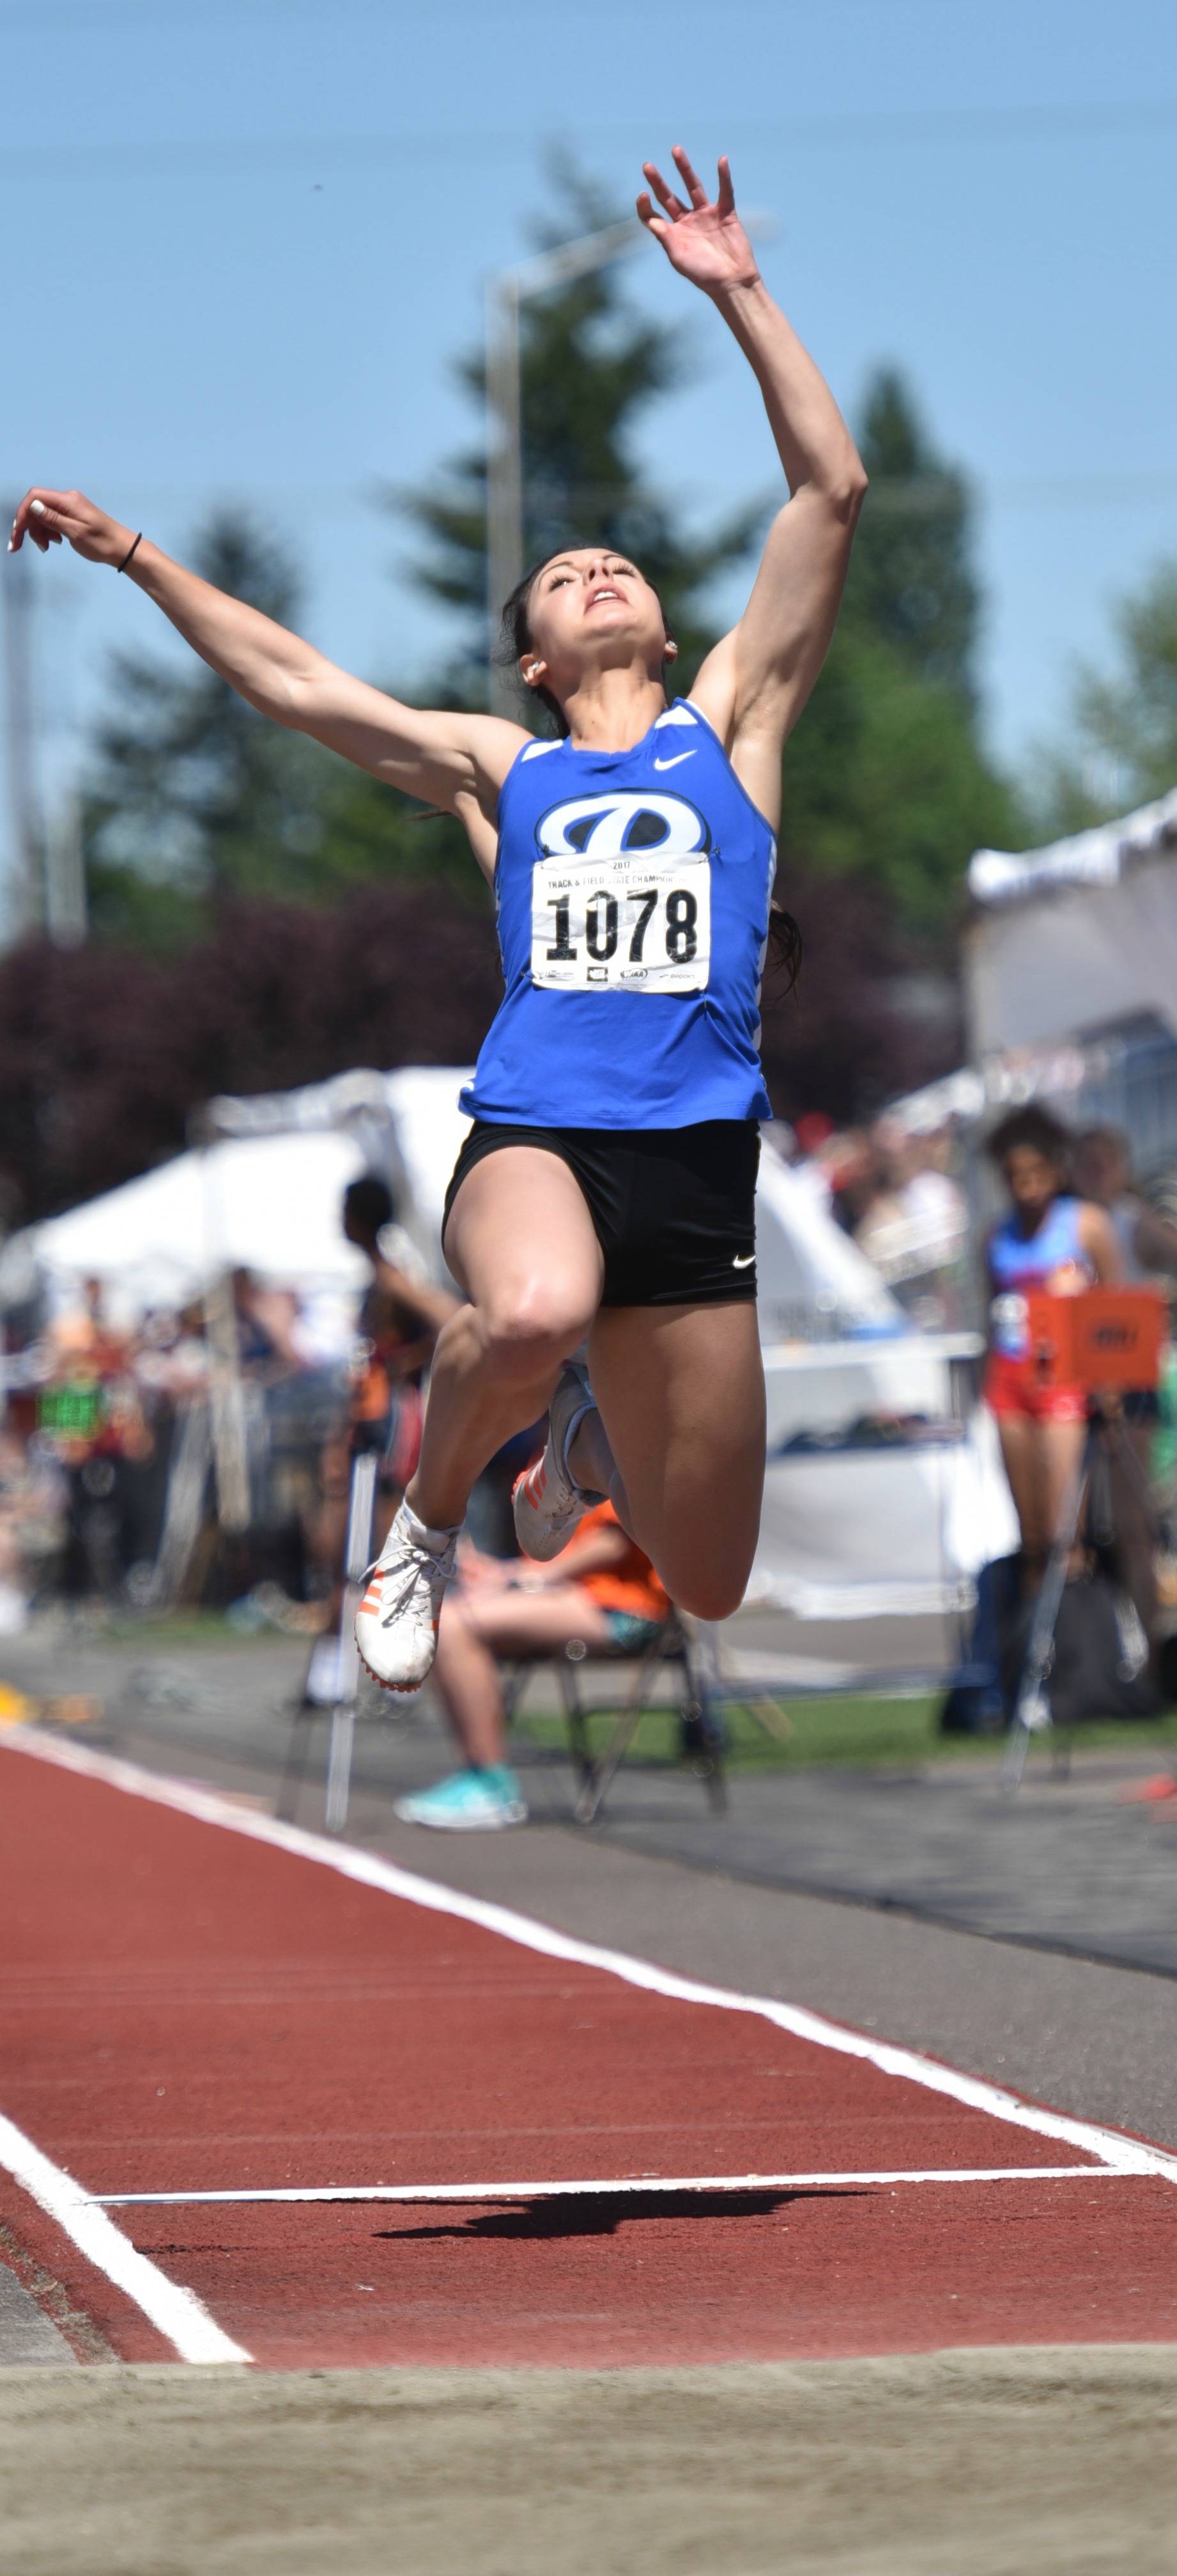 Bothell’s Lauren Stavig competes in the long jump. Courtesy of Greg Nelson